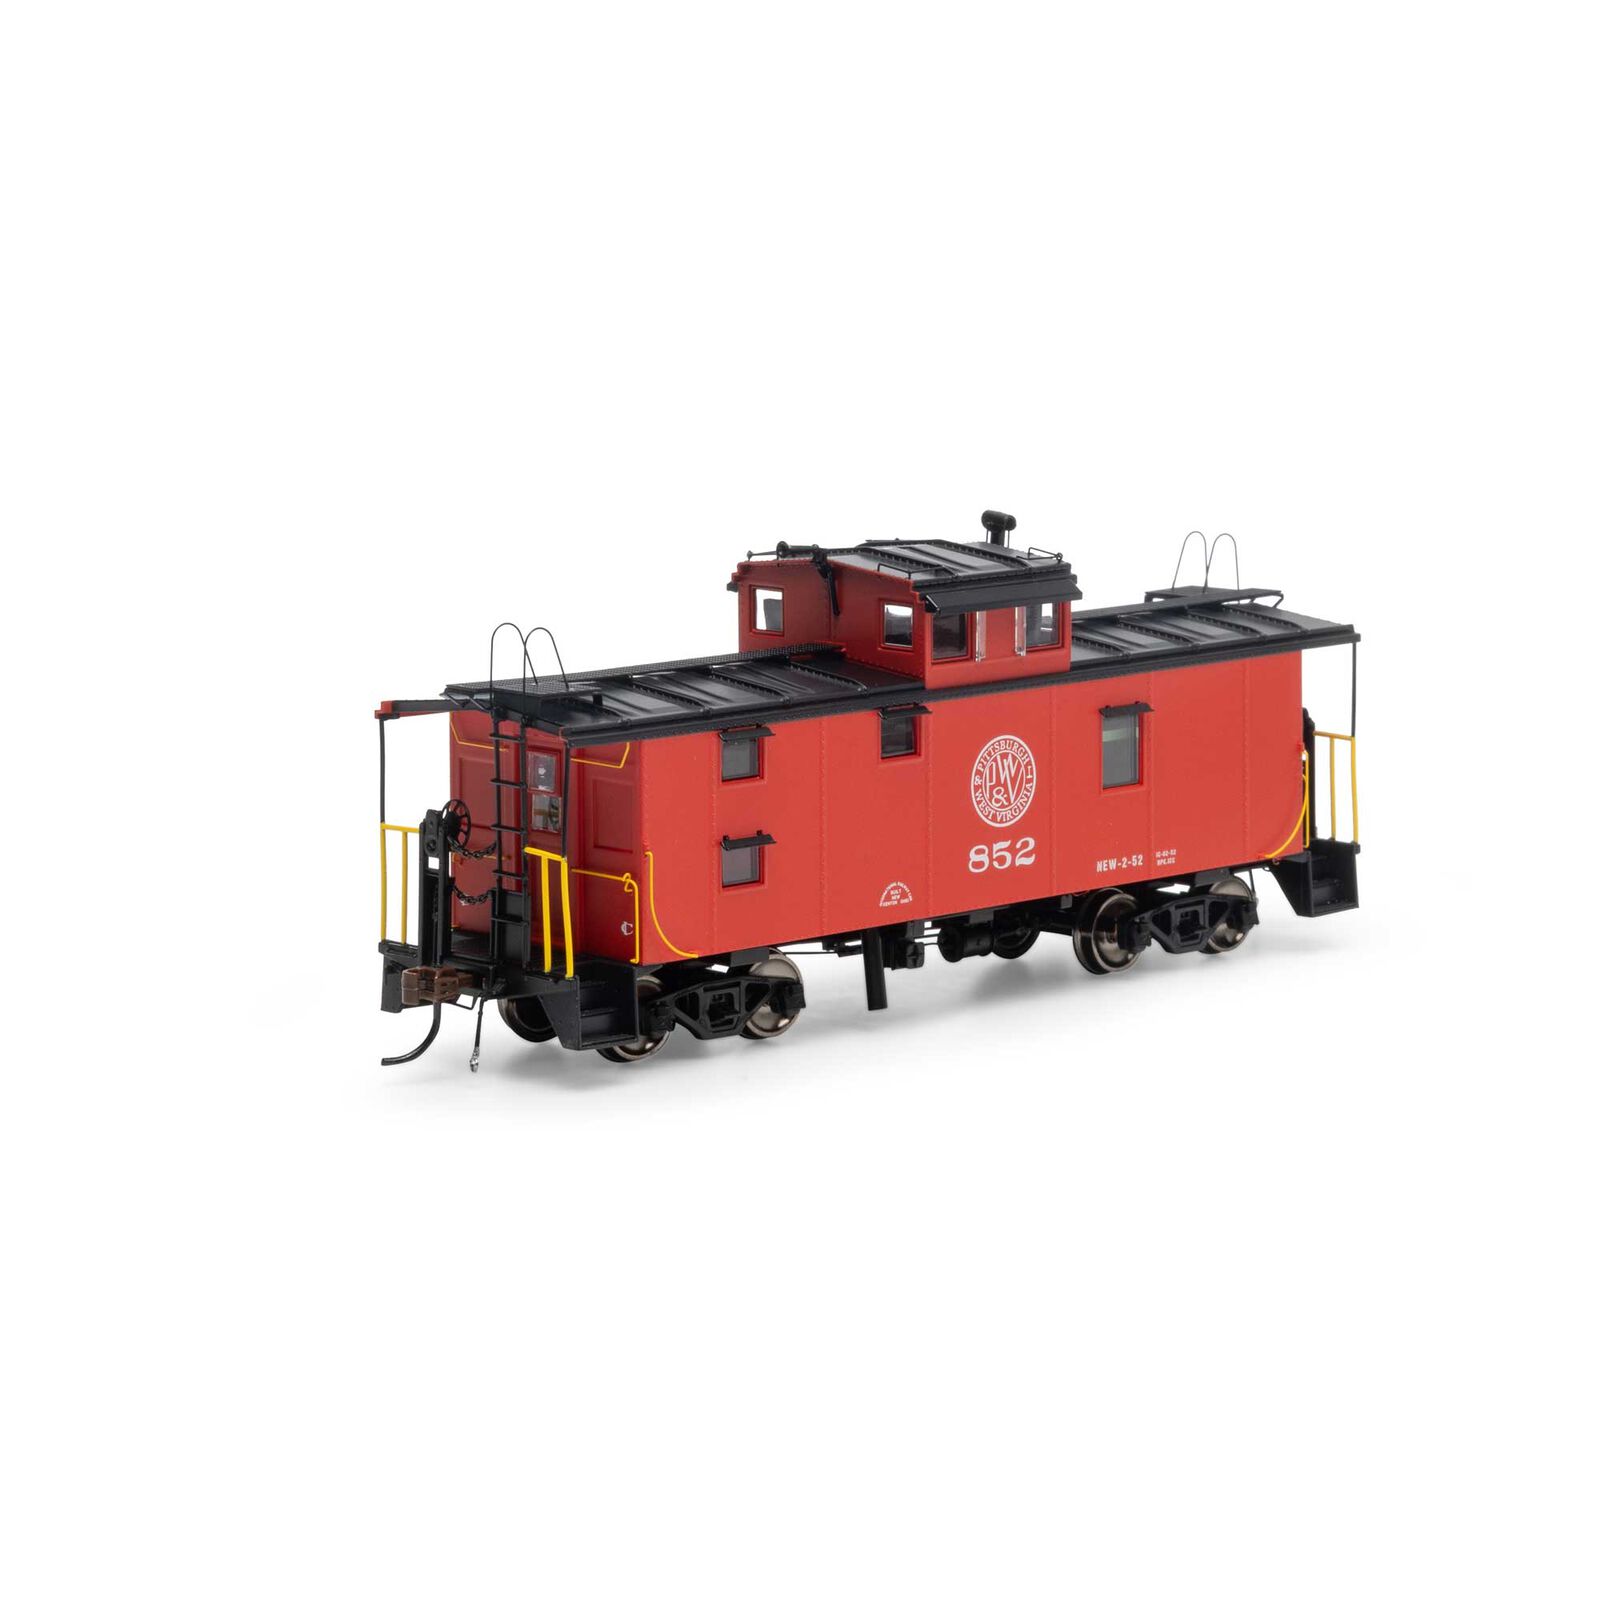 HO ICC Caboose with Lights & Sound, P&WV #852